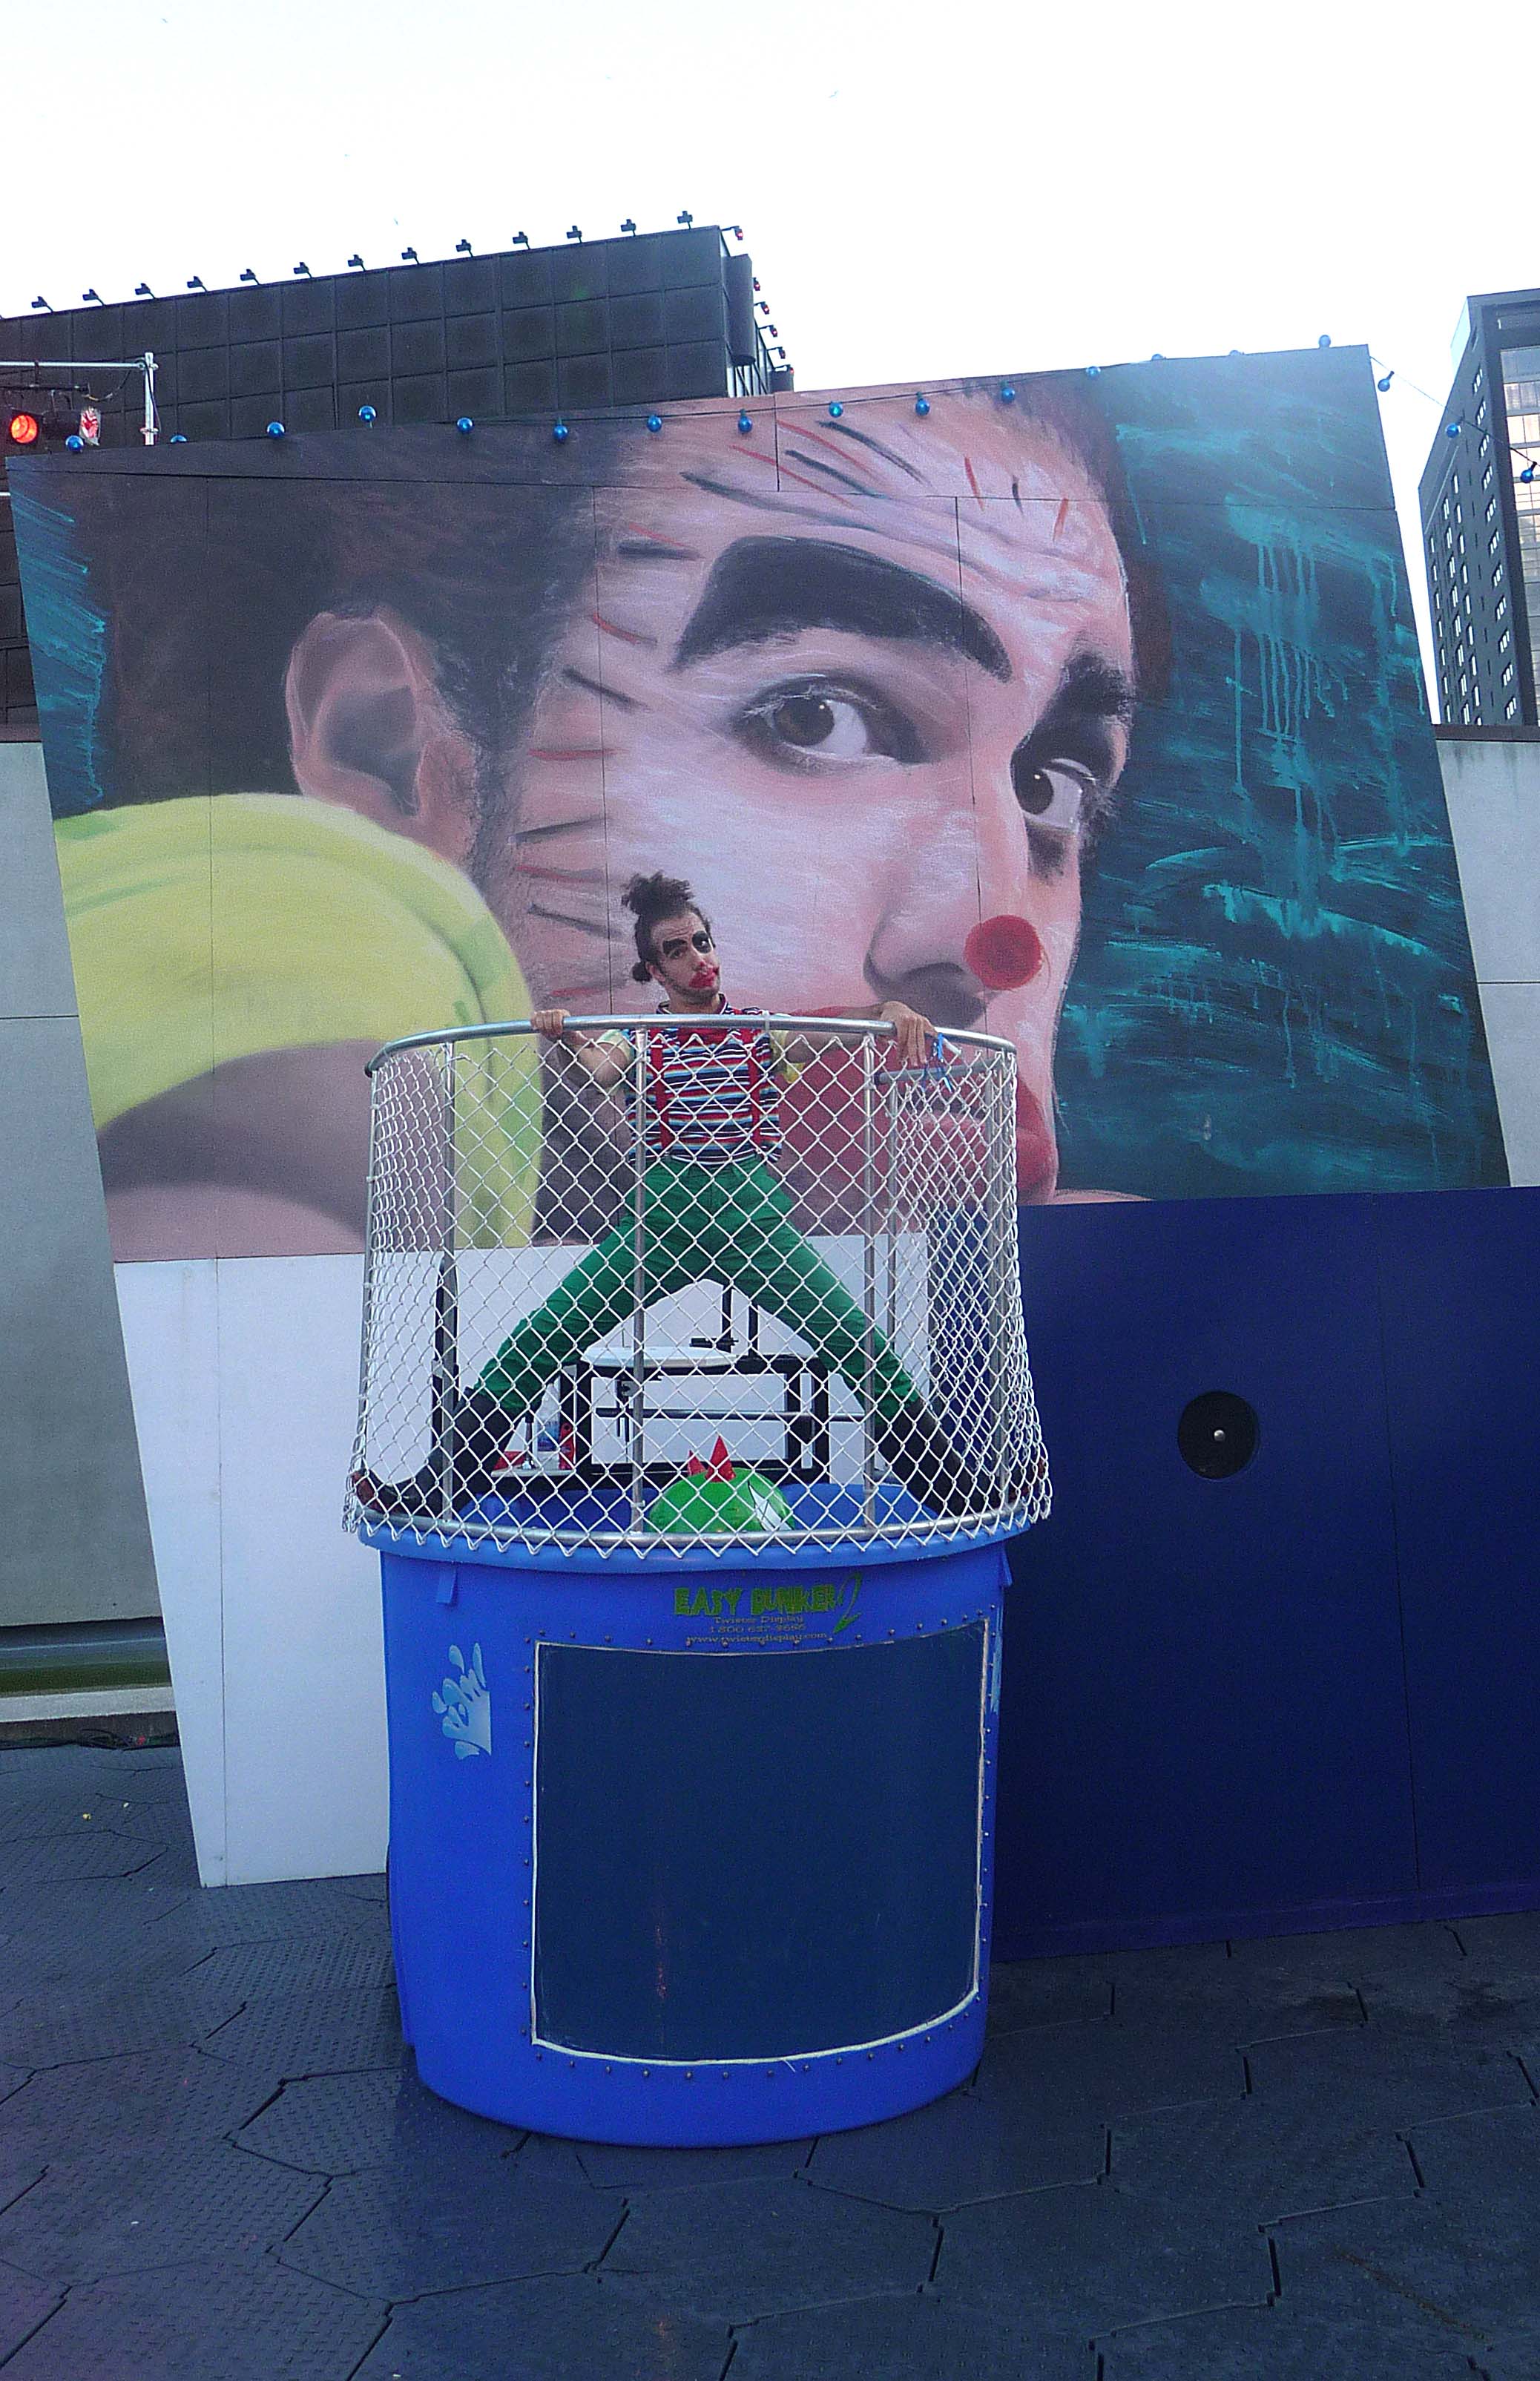 If you threw the ball in the right spot, this clown got dunked in water.